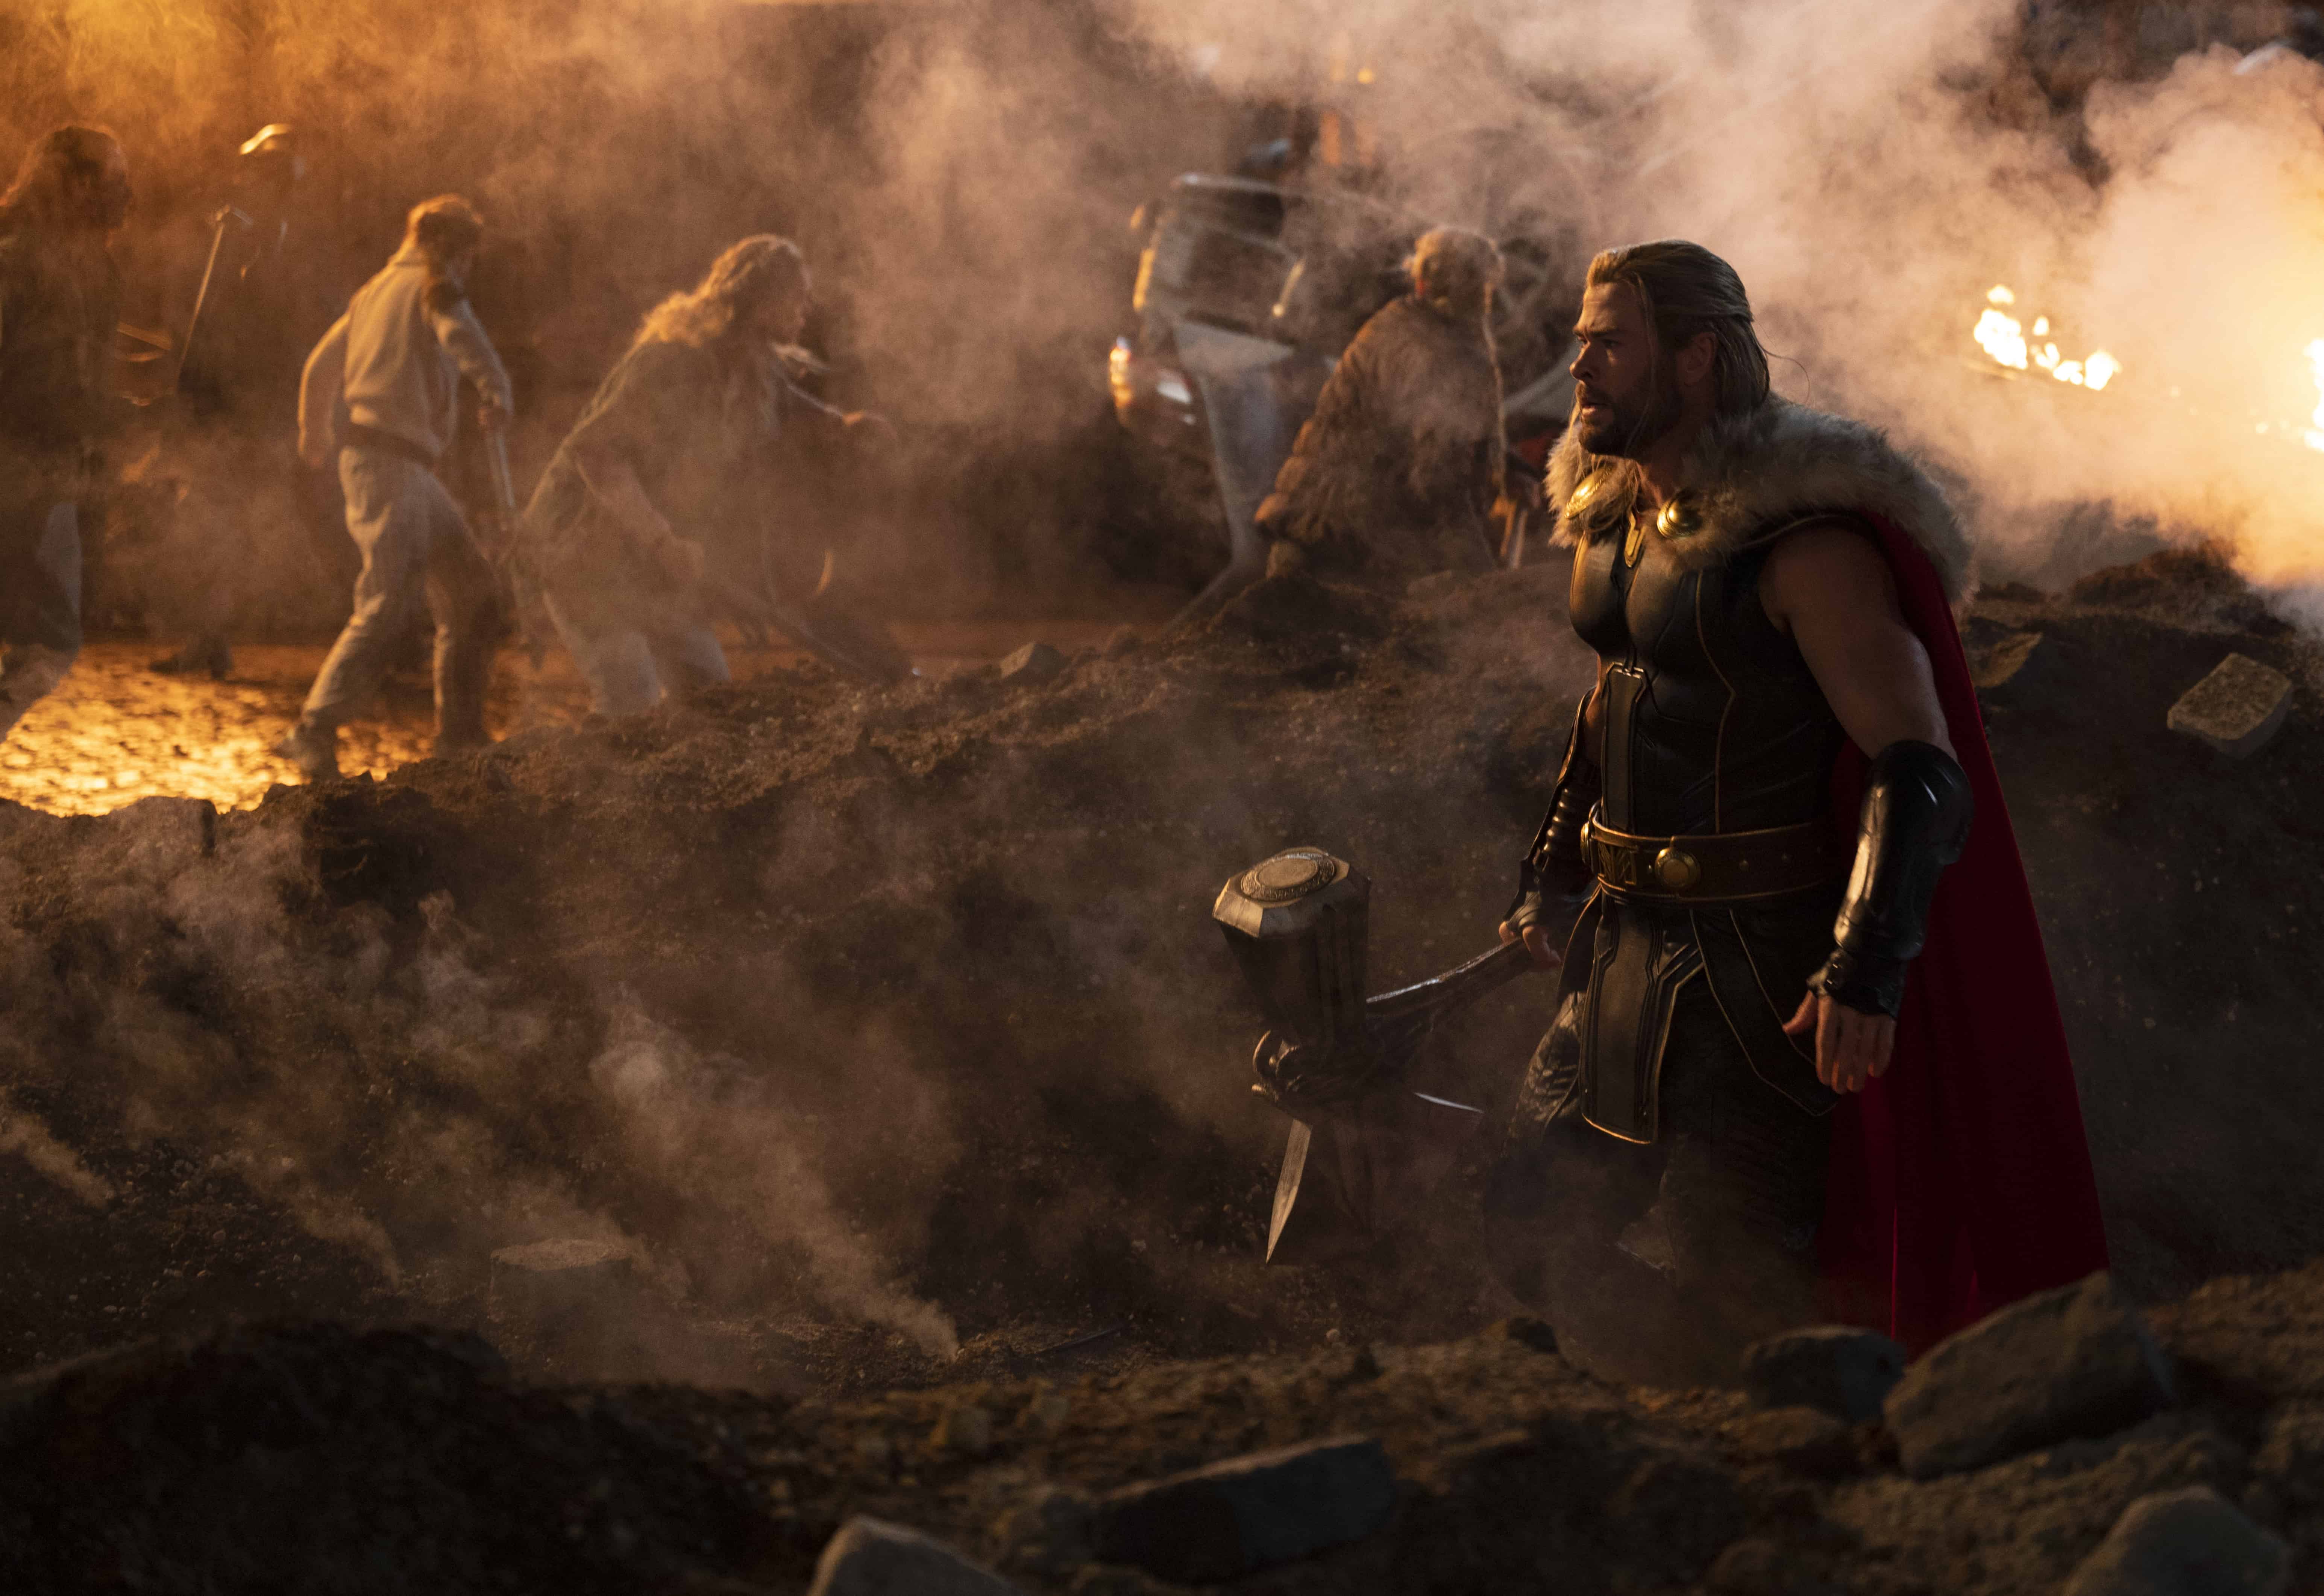 Thor: Love and Thunder Brings Back the Bright and Flashy Marvel Films